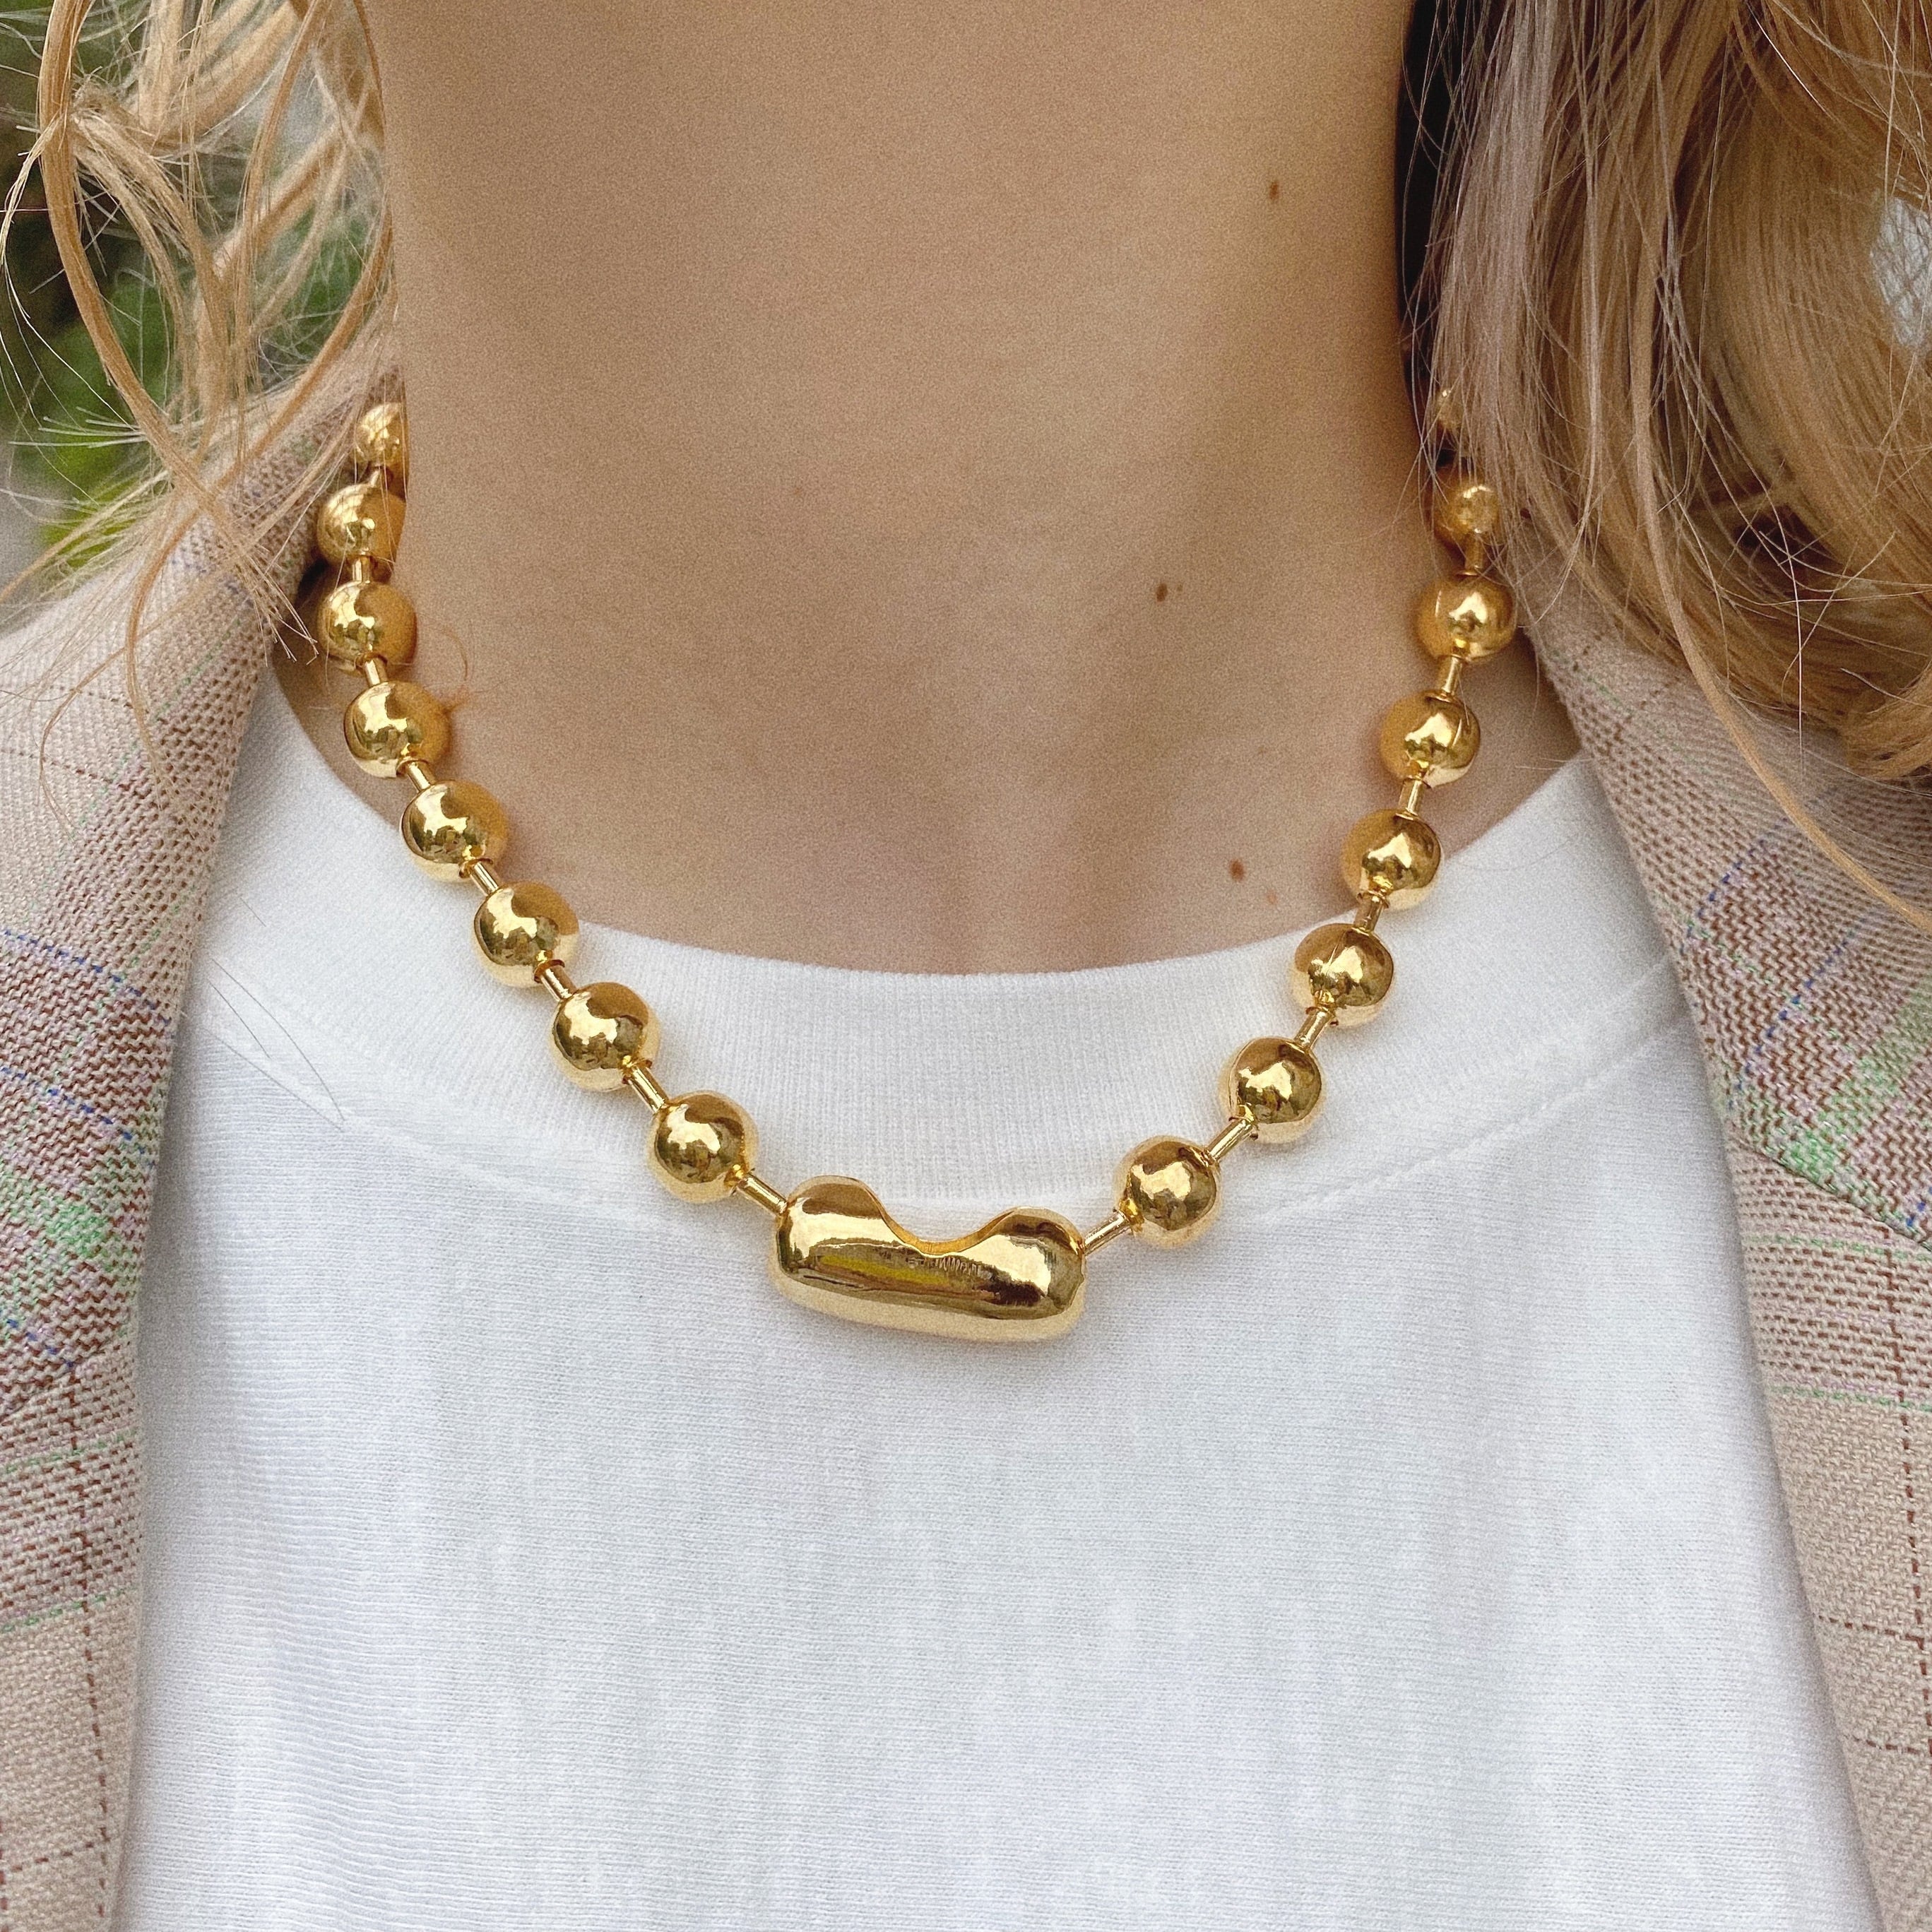 【chieko+ 】Big ball necklace † gold ネックレス